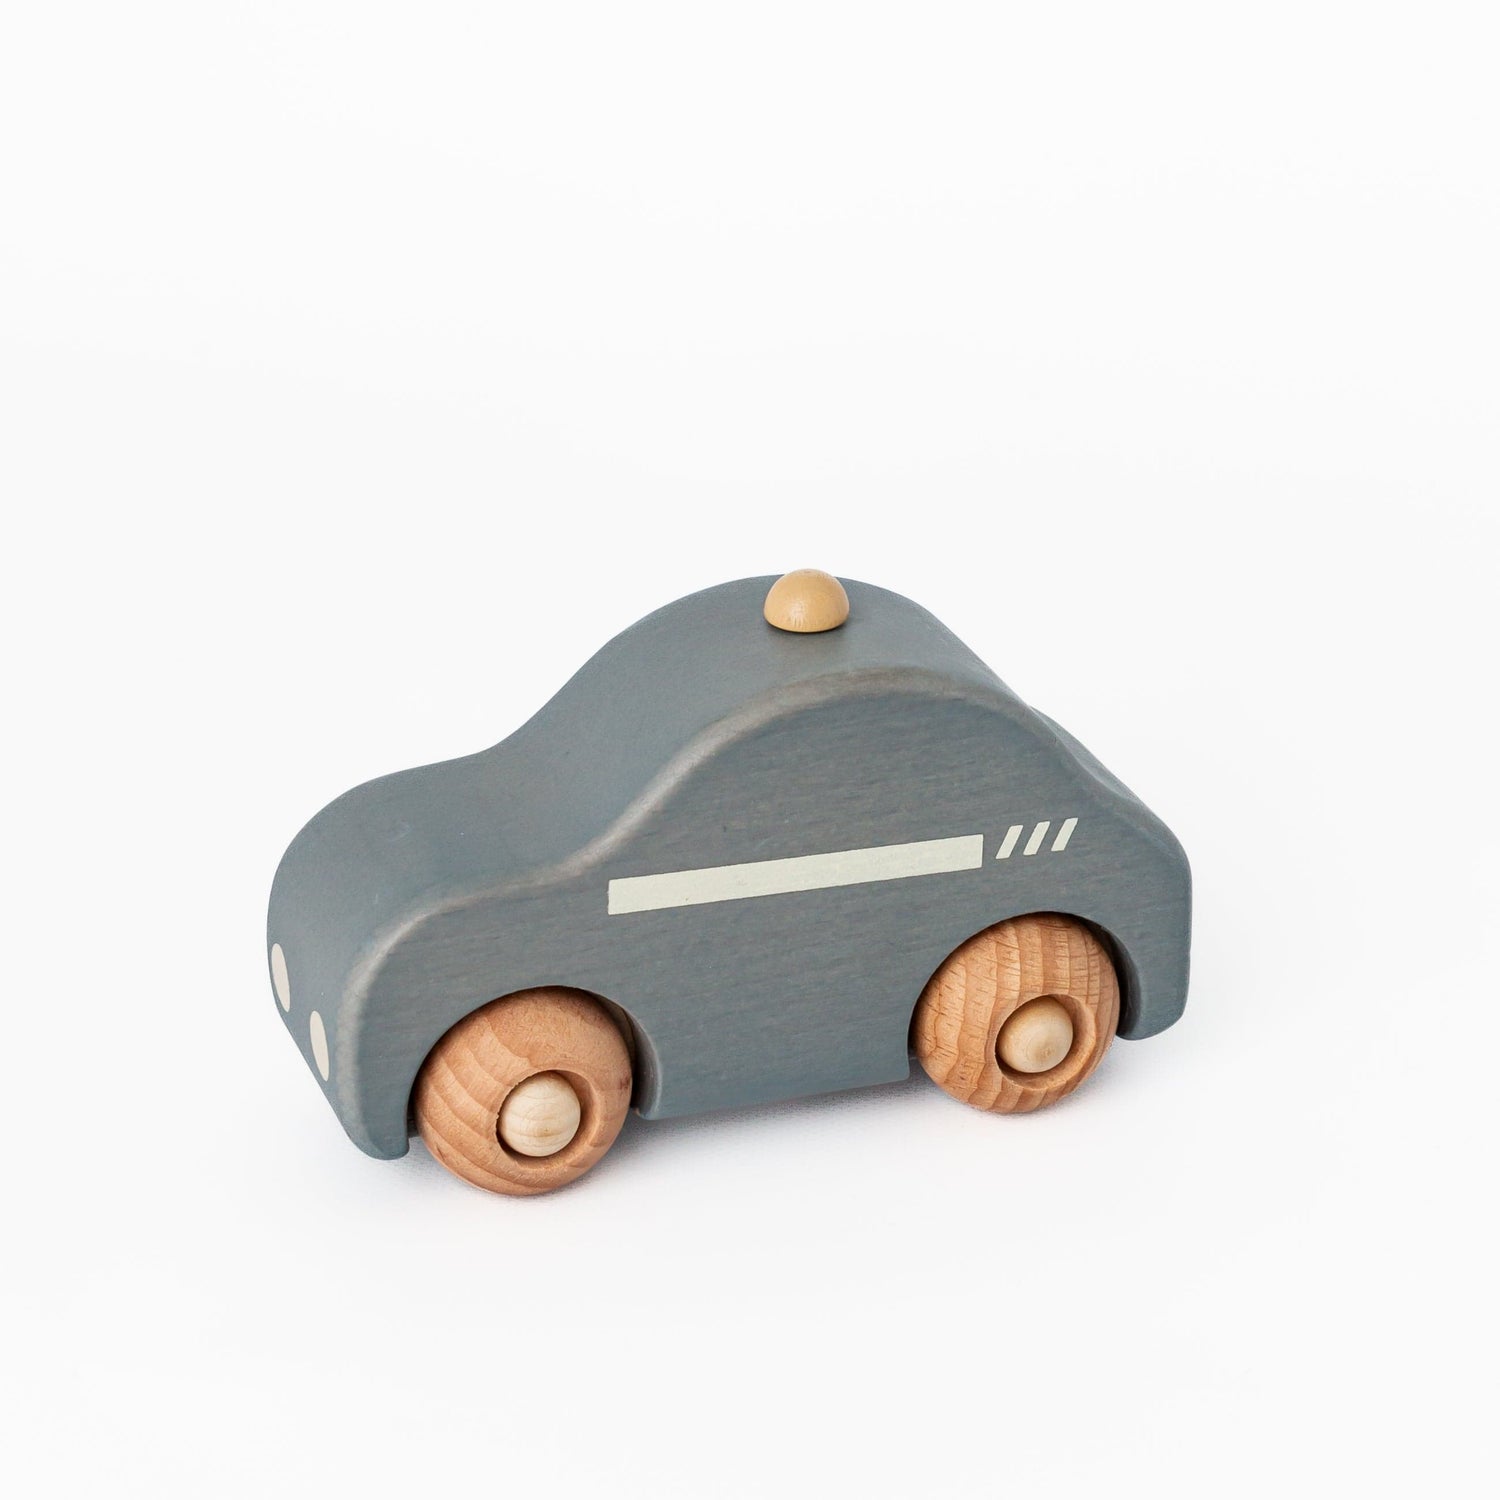 Konges Slojd Things That GO Wooden Toy Police Car Wooden Toy Police Car | Toy Police Car